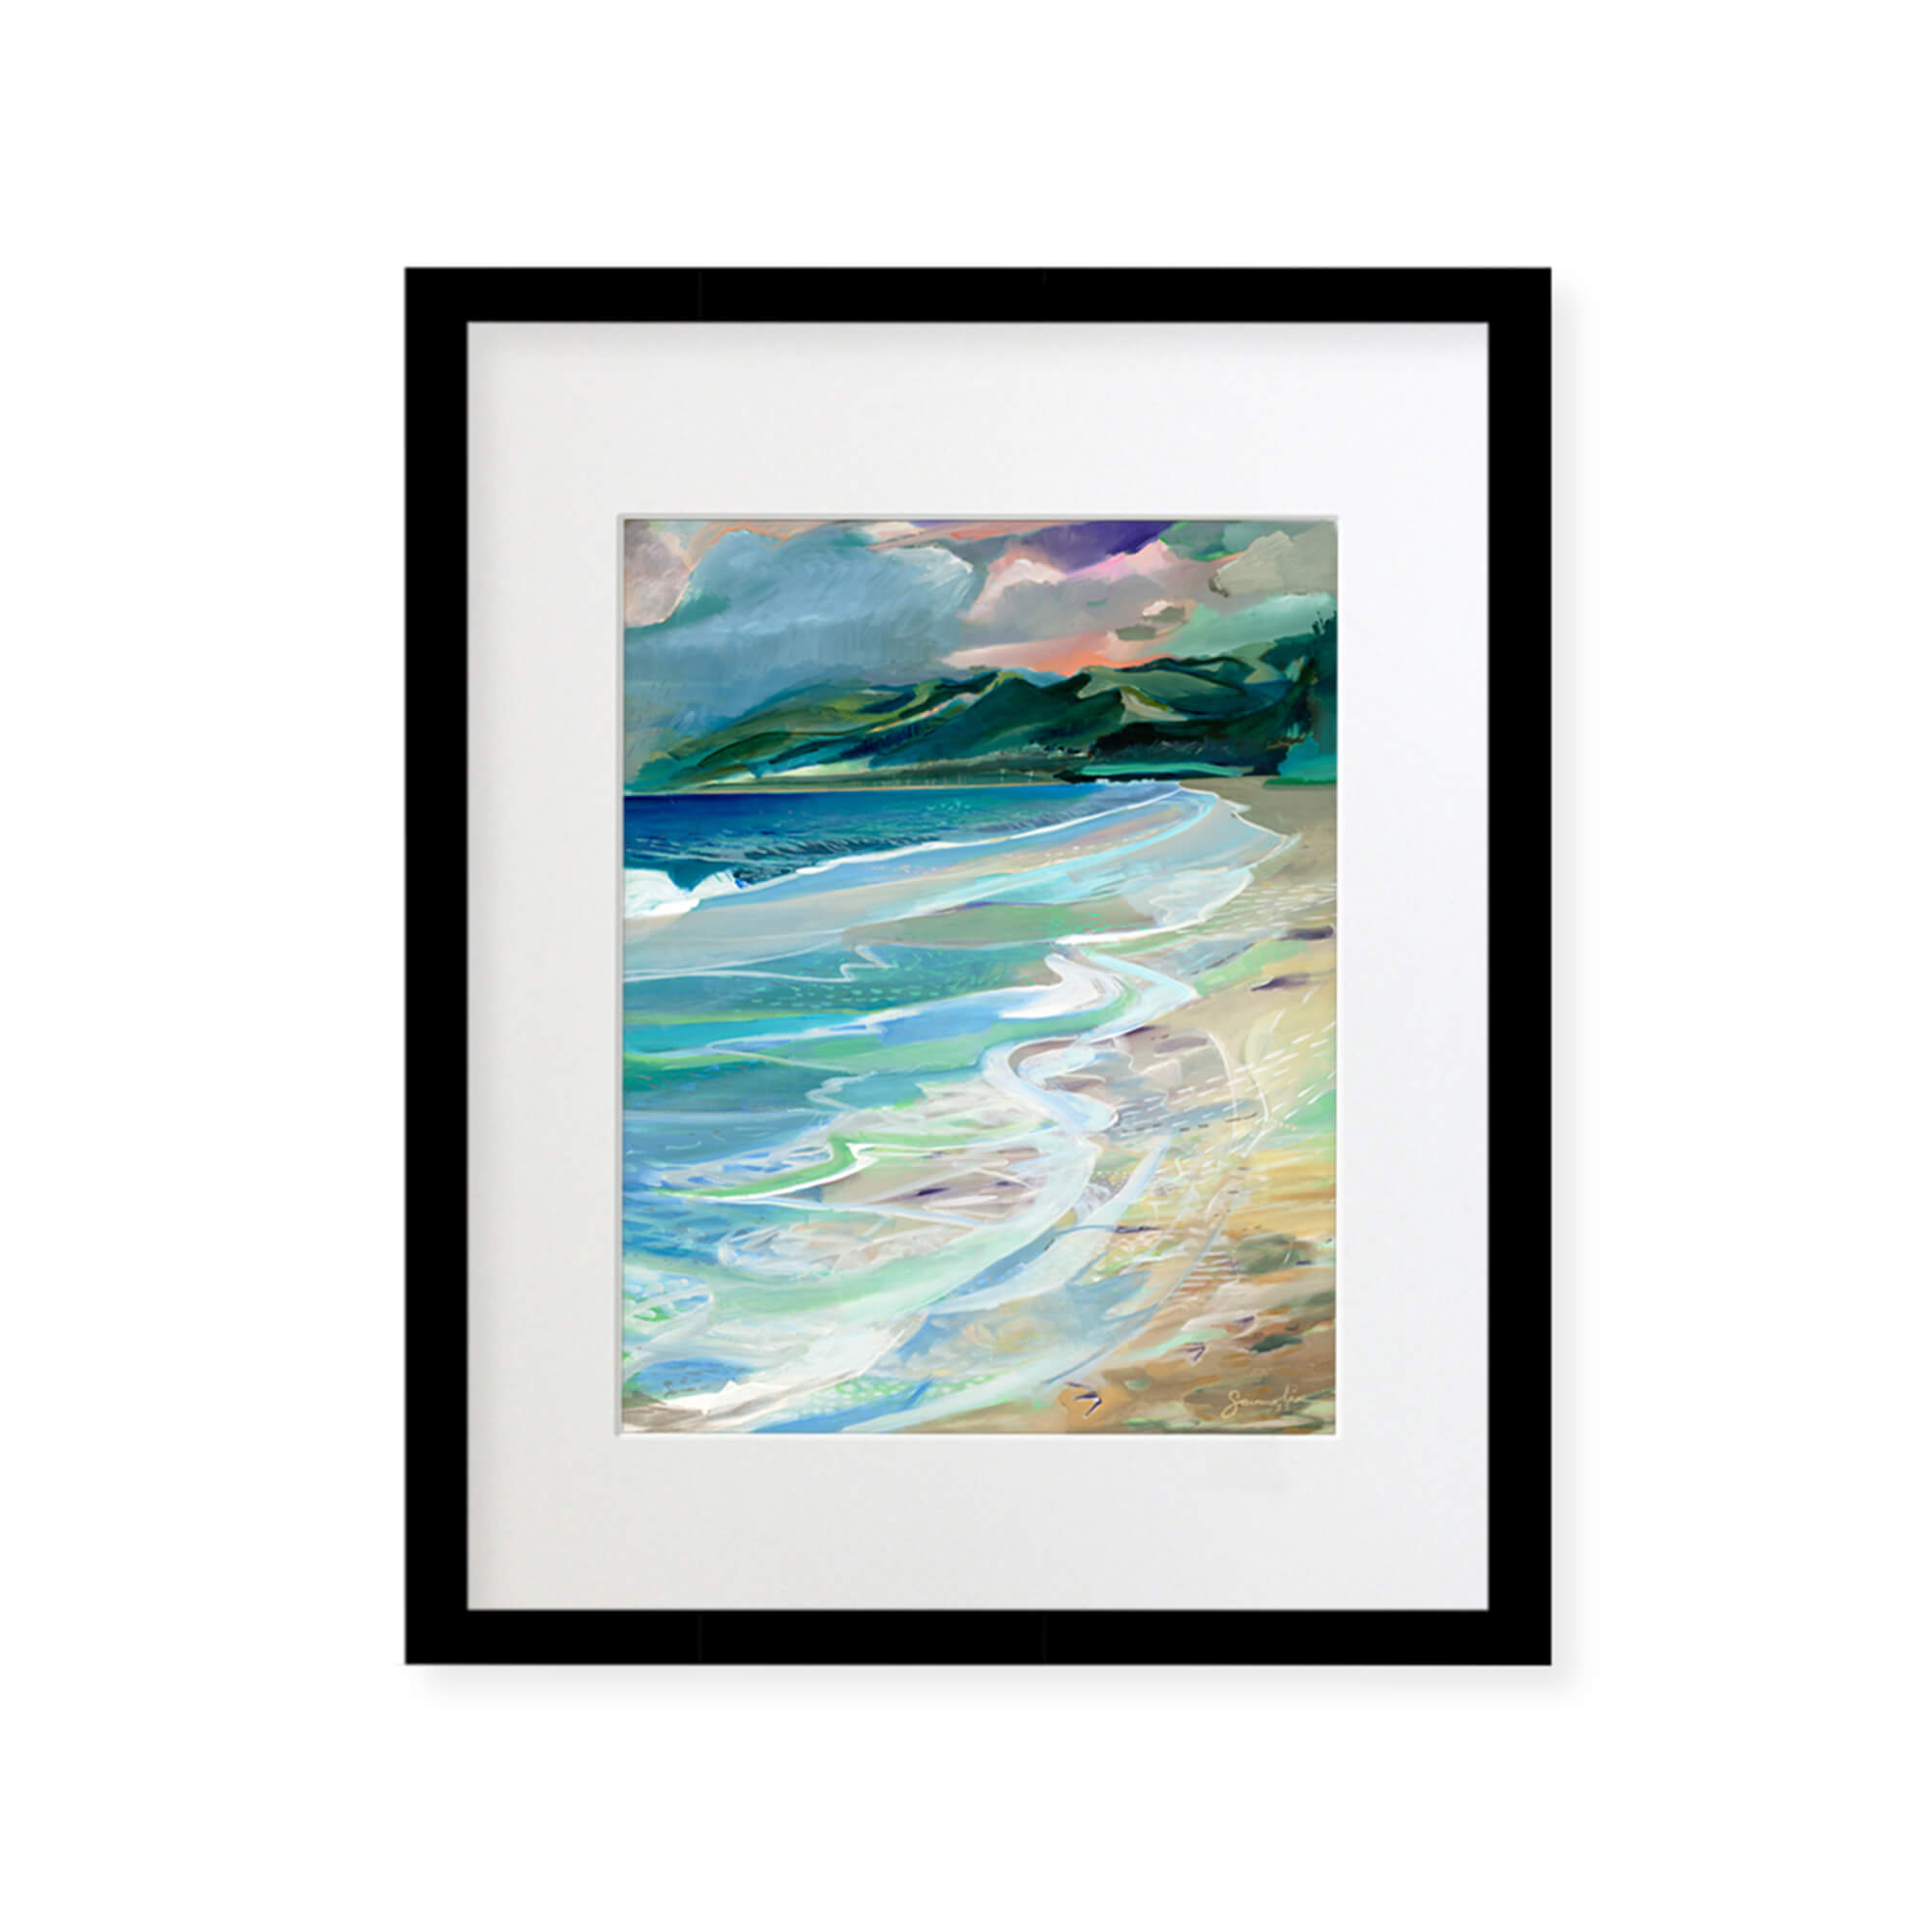 A framed matted art print featuring a beautiful abstract landscape with crashing waves and distant mountains by popular Hawaii artist Saumolia Puapuaga